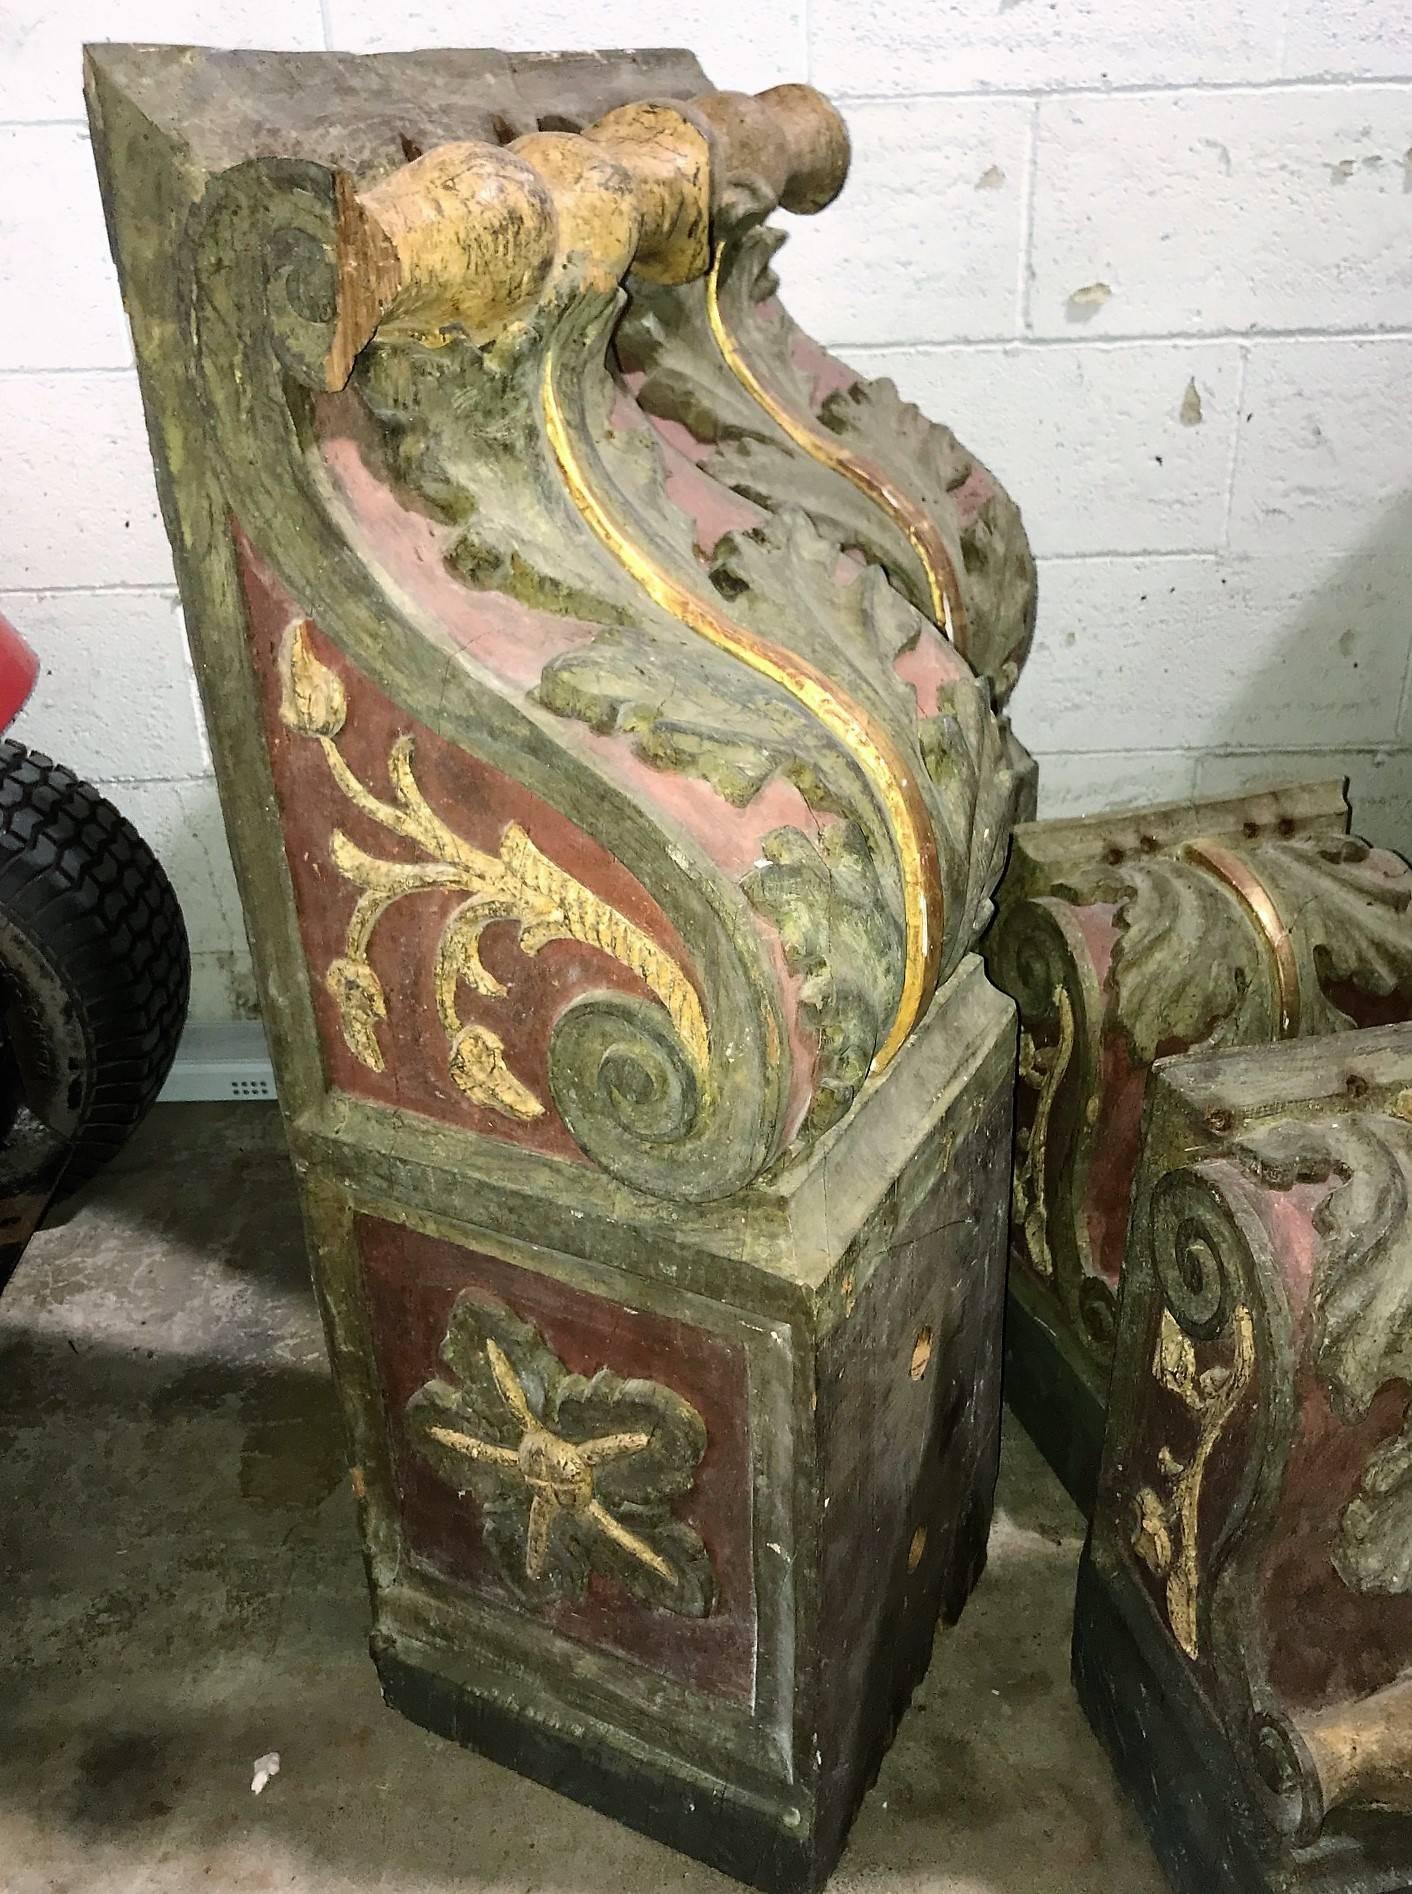 Fabulous grouping of eight 19th century Italian architectural corbels of pine and oak, masterfully hand-carved with scrolling acanthus leaves depicted in relief. The set retains the original old painted and polychrome finish,

circa 1860.

Could